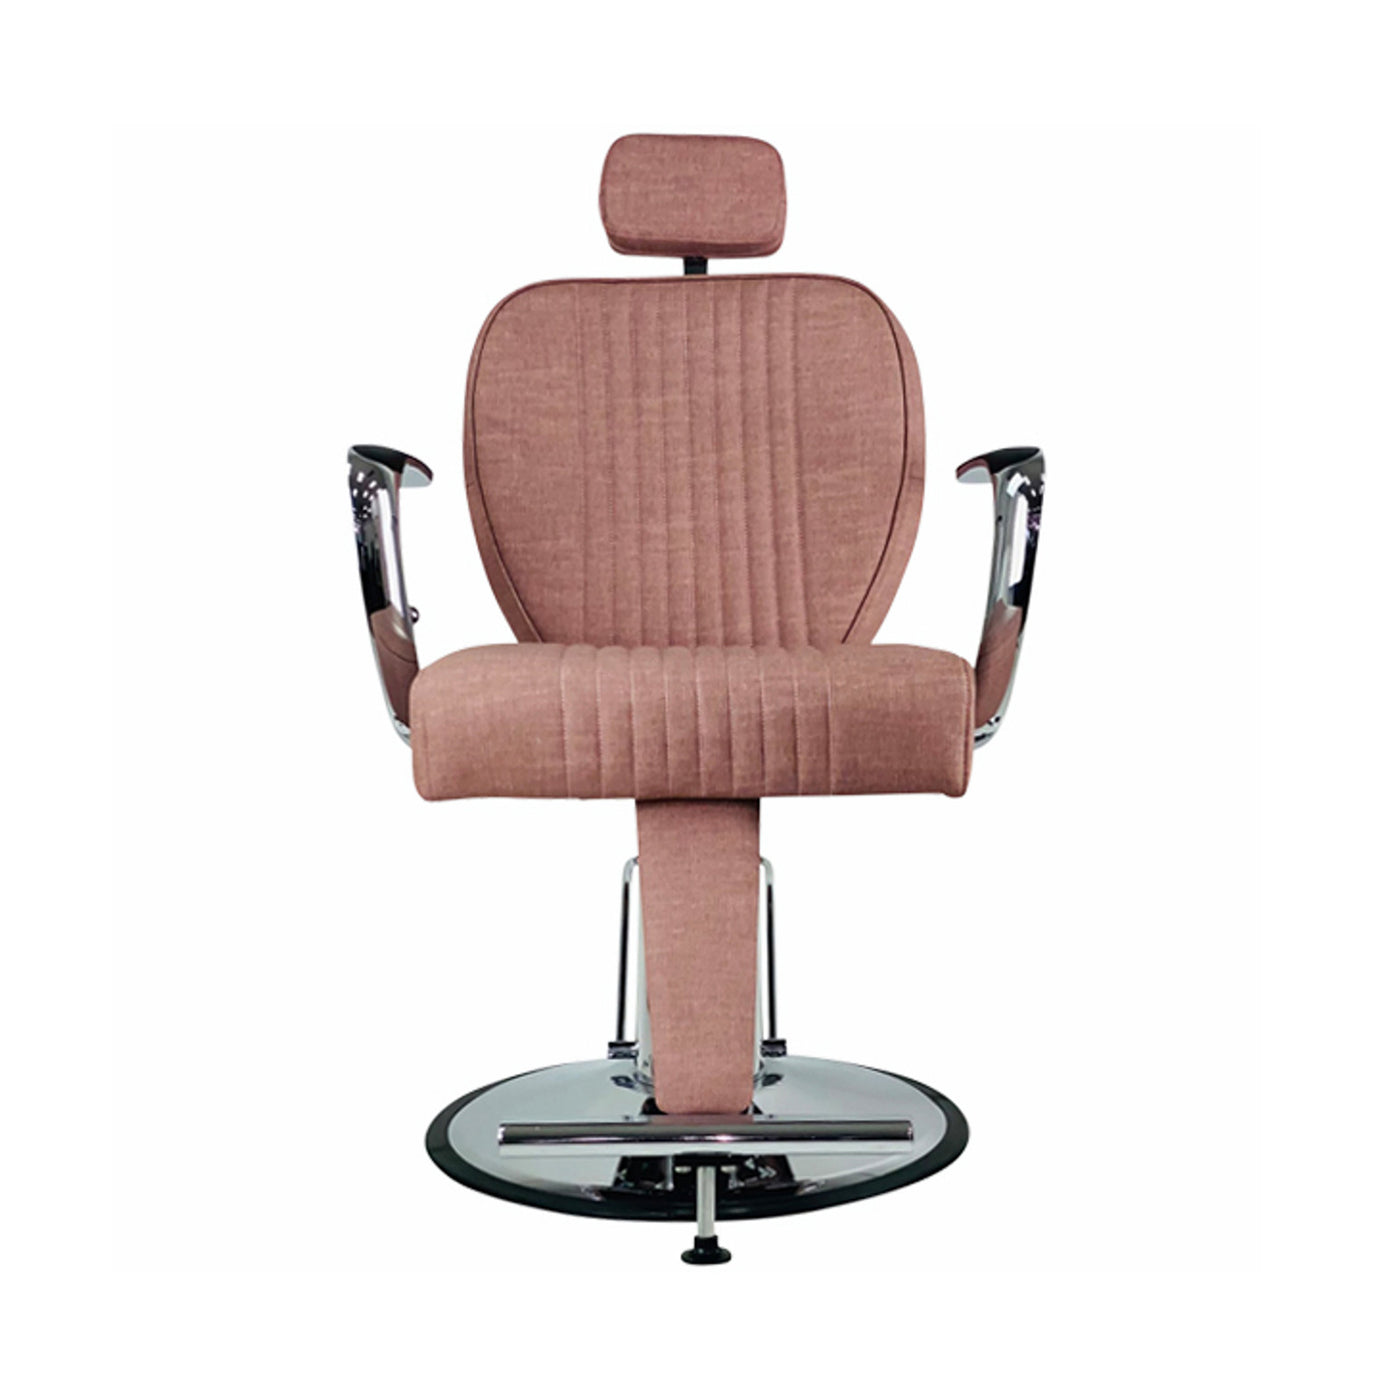 Joiken Titan Reclining Brow & Styling Chair - Dusty Pink front